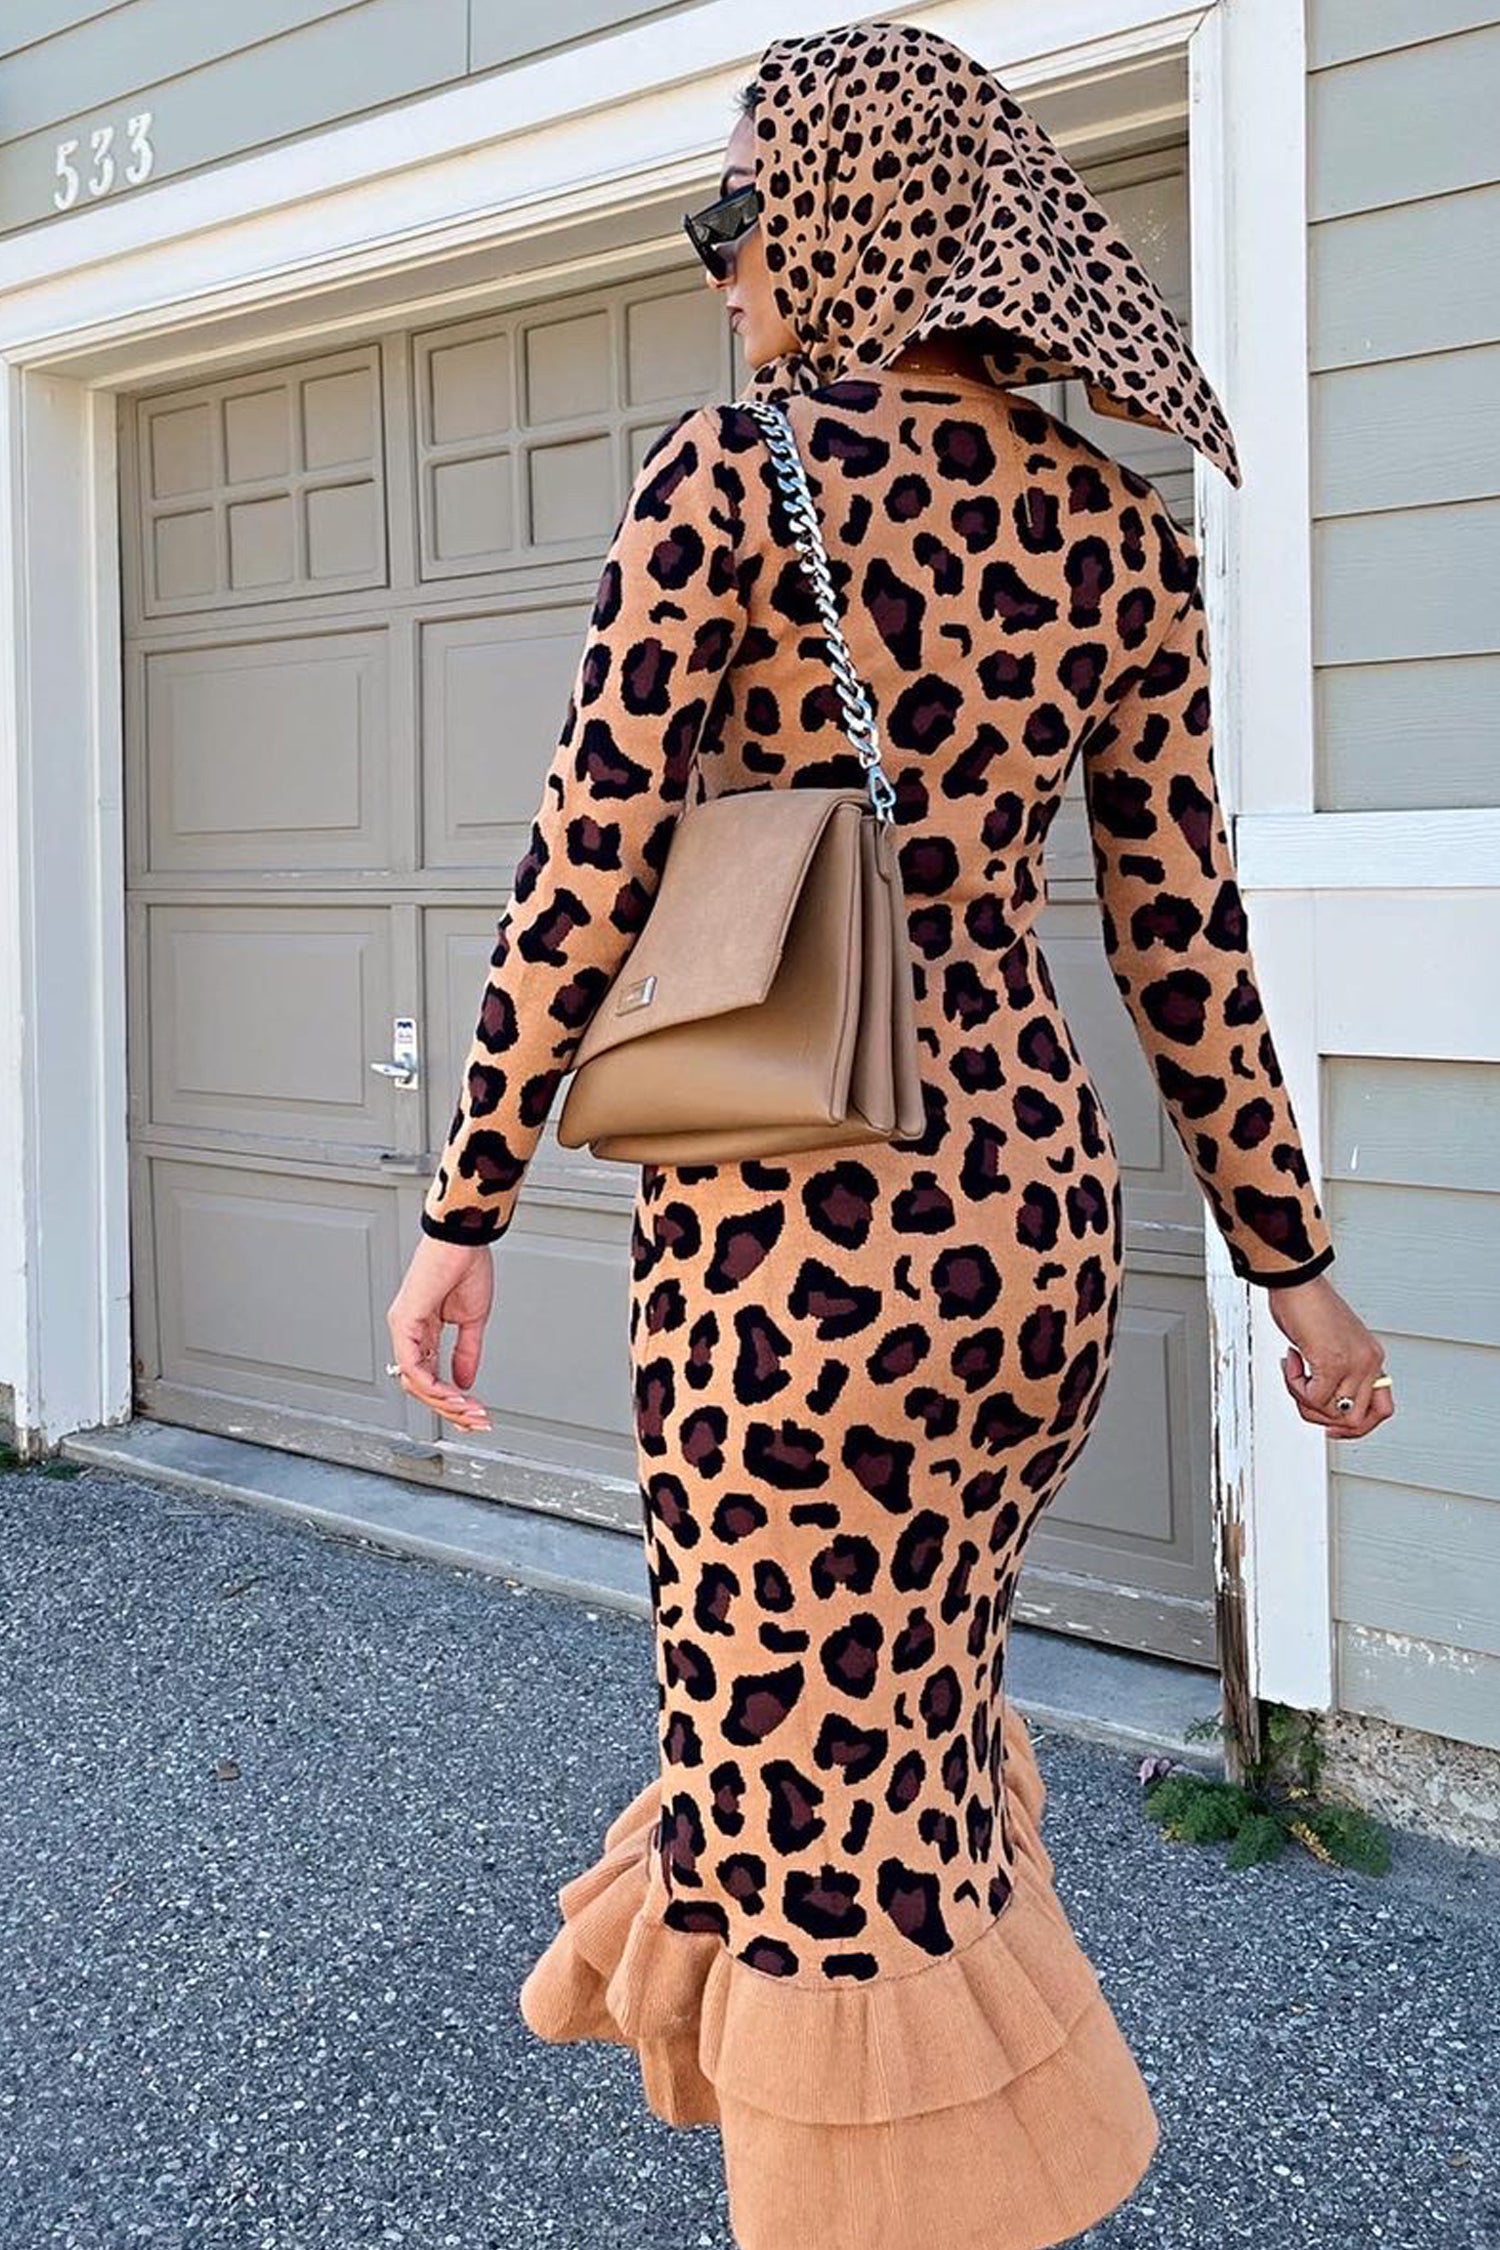 Model wearing Leopard Headscarf standing facing away from the camera